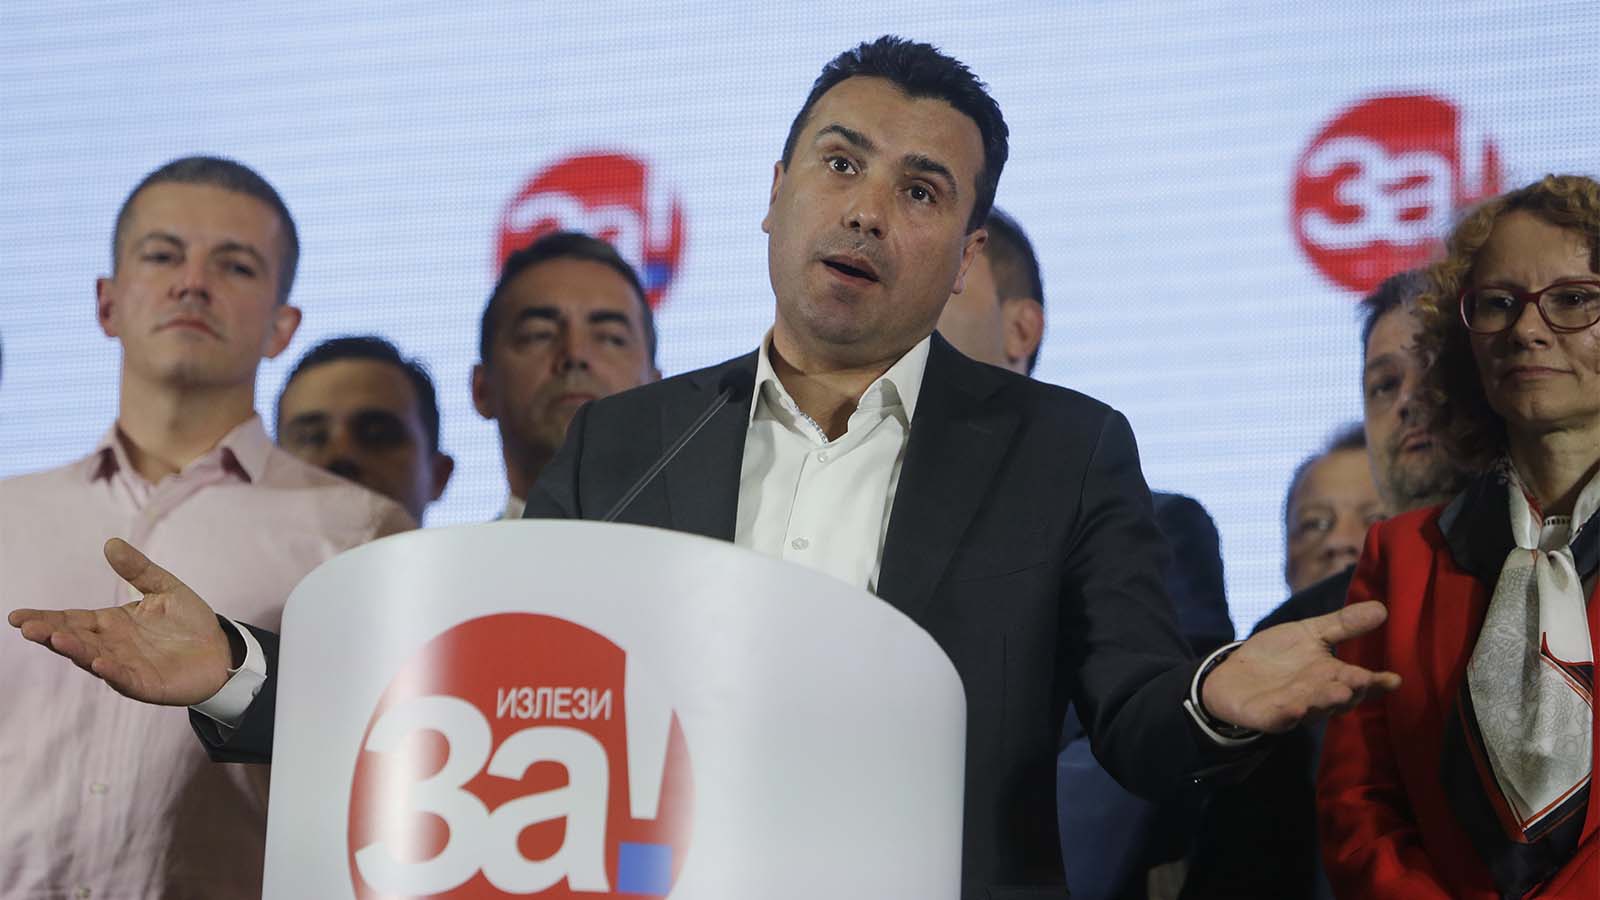 Macedonia's Prime Minister Zoran Zaev gestures as he talks to members of the media about the referendum in Skopje, Macedonia, late Sunday, Sept. 30, 2018. The crucial referendum on accepting a deal with Greece to change the country's name to North Macedonia to pave the way for NATO membership attracted tepid voter participation Sunday, a blow to Zaev's hopes for a strong message of support. (AP Photo/Boris Grdanoski)